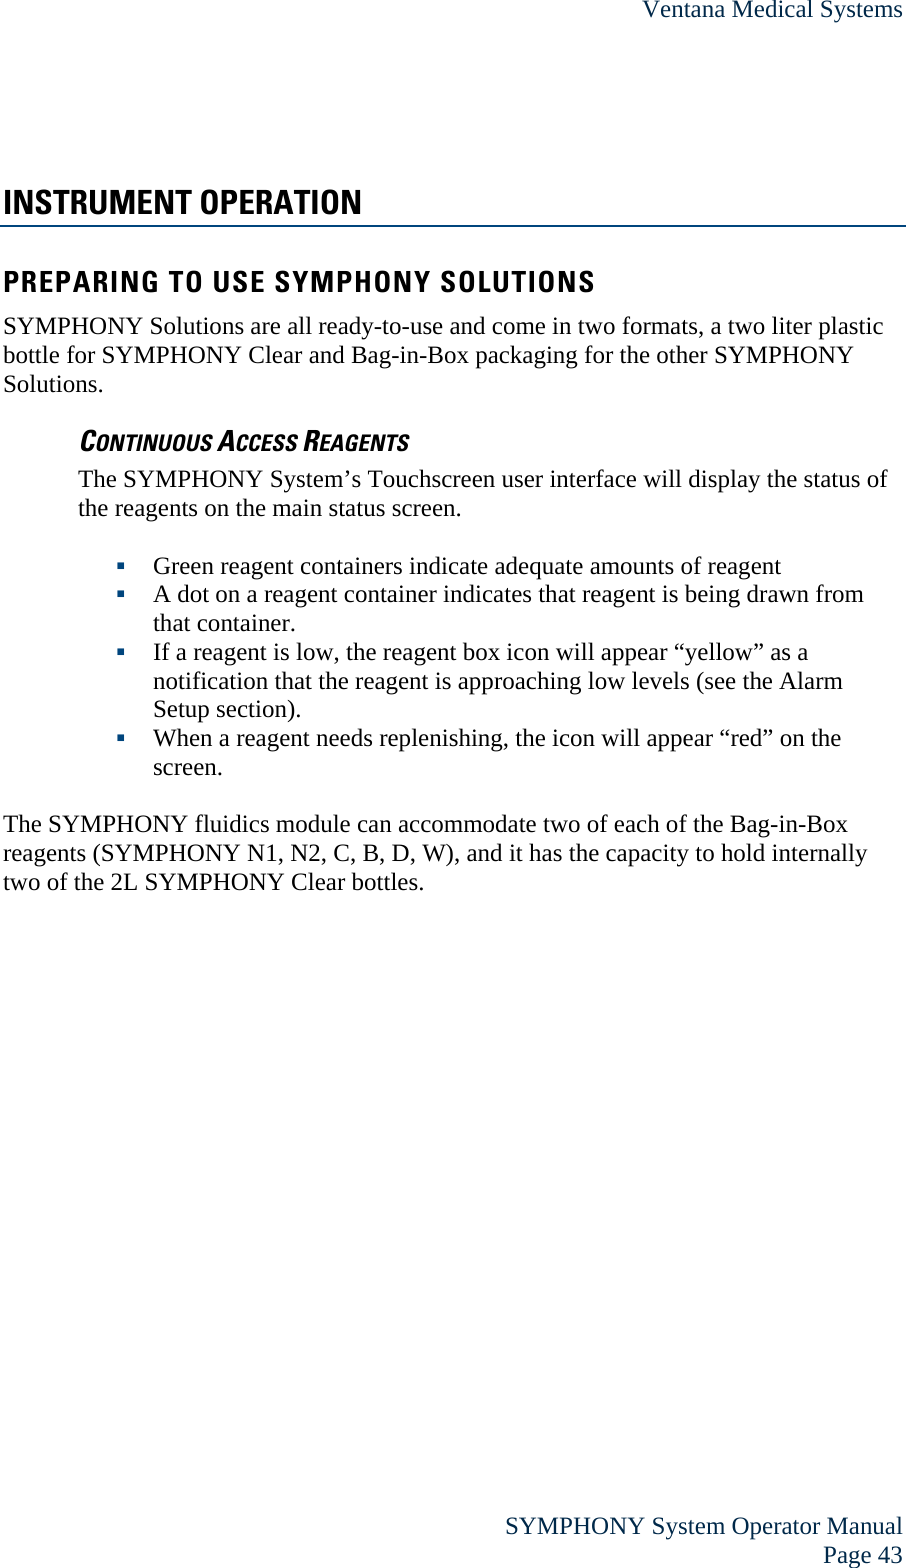 Ventana Medical Systems  SYMPHONY System Operator Manual Page 43 INSTRUMENT OPERATION PREPARING TO USE SYMPHONY SOLUTIONS SYMPHONY Solutions are all ready-to-use and come in two formats, a two liter plastic bottle for SYMPHONY Clear and Bag-in-Box packaging for the other SYMPHONY Solutions. CONTINUOUS ACCESS REAGENTS The SYMPHONY System’s Touchscreen user interface will display the status of the reagents on the main status screen.   Green reagent containers indicate adequate amounts of reagent  A dot on a reagent container indicates that reagent is being drawn from that container.  If a reagent is low, the reagent box icon will appear “yellow” as a notification that the reagent is approaching low levels (see the Alarm Setup section).   When a reagent needs replenishing, the icon will appear “red” on the screen.  The SYMPHONY fluidics module can accommodate two of each of the Bag-in-Box reagents (SYMPHONY N1, N2, C, B, D, W), and it has the capacity to hold internally two of the 2L SYMPHONY Clear bottles.   